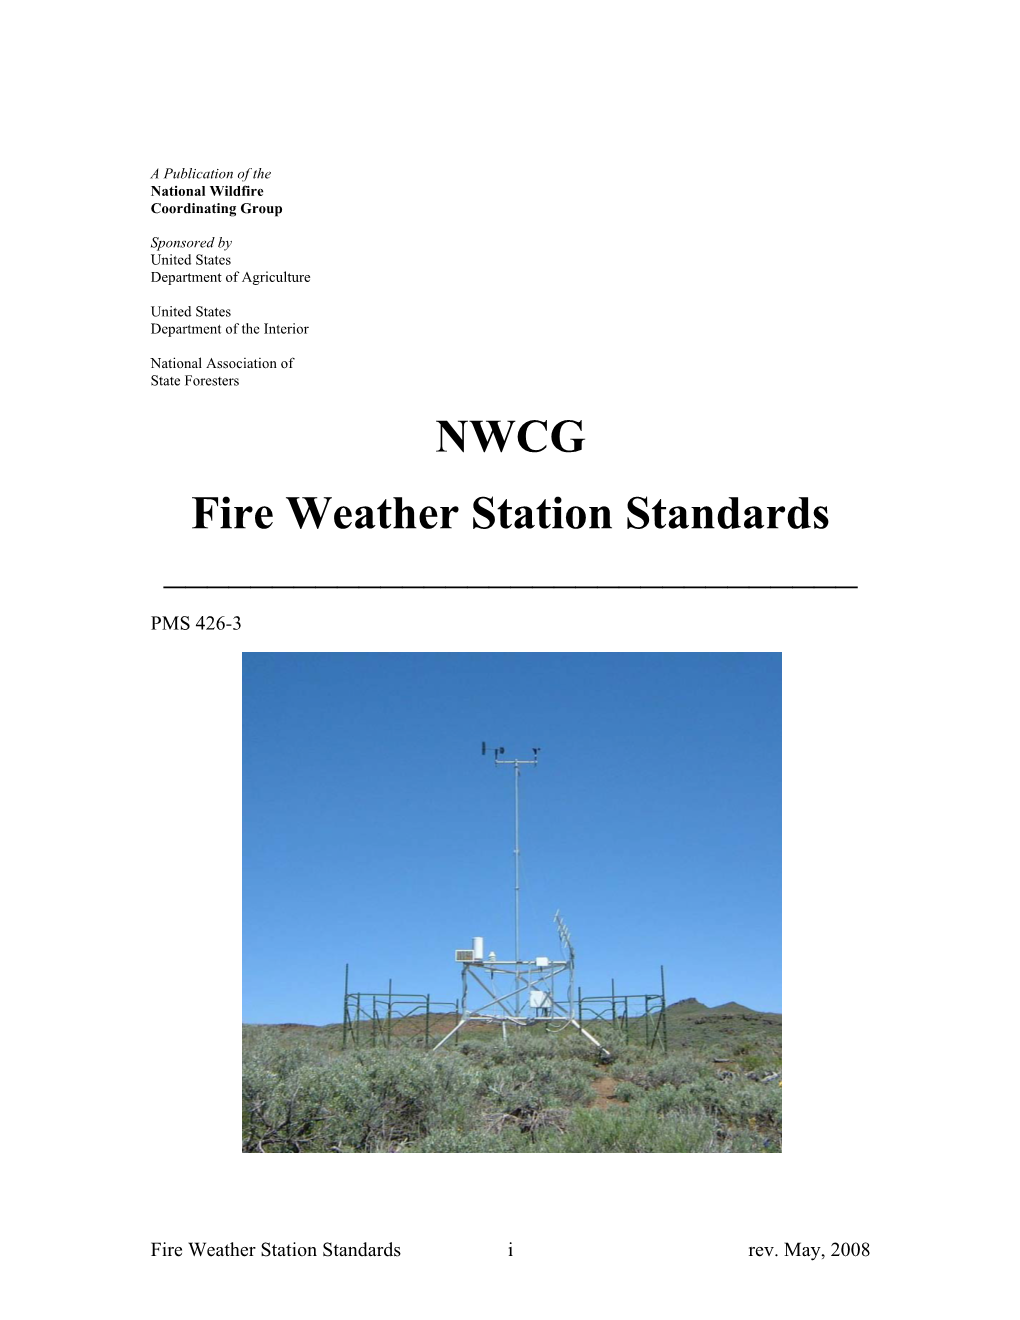 NWCG Fire Weather Station Standards